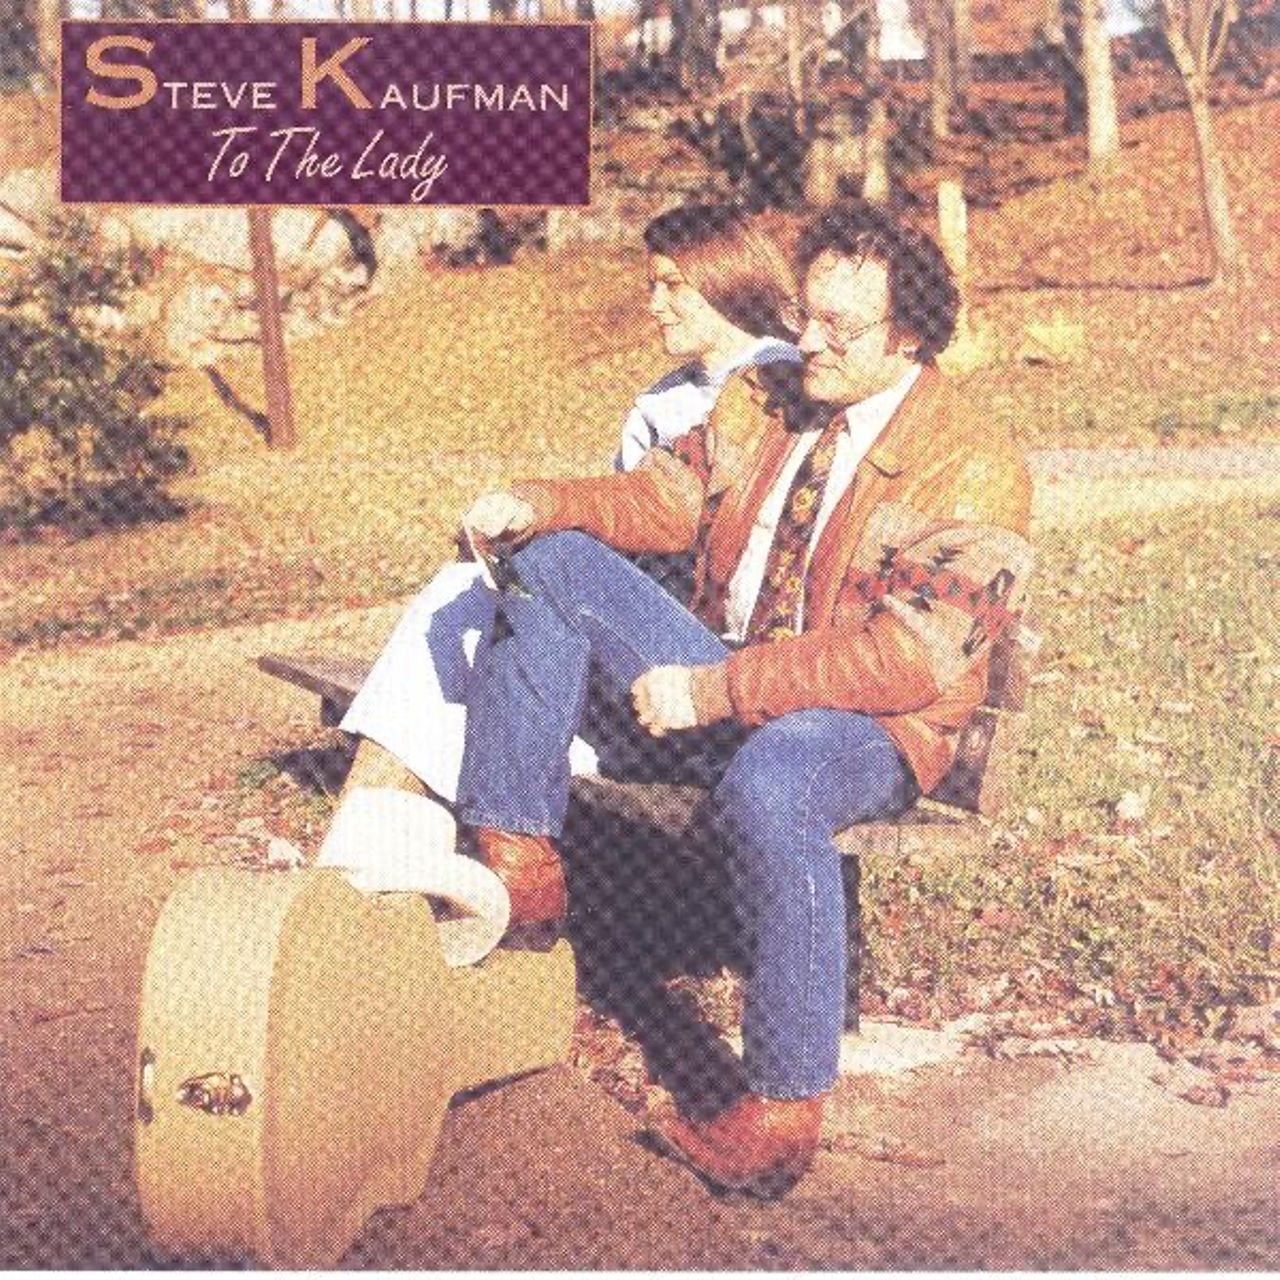 Steve Kaufman - To The Lady cover album